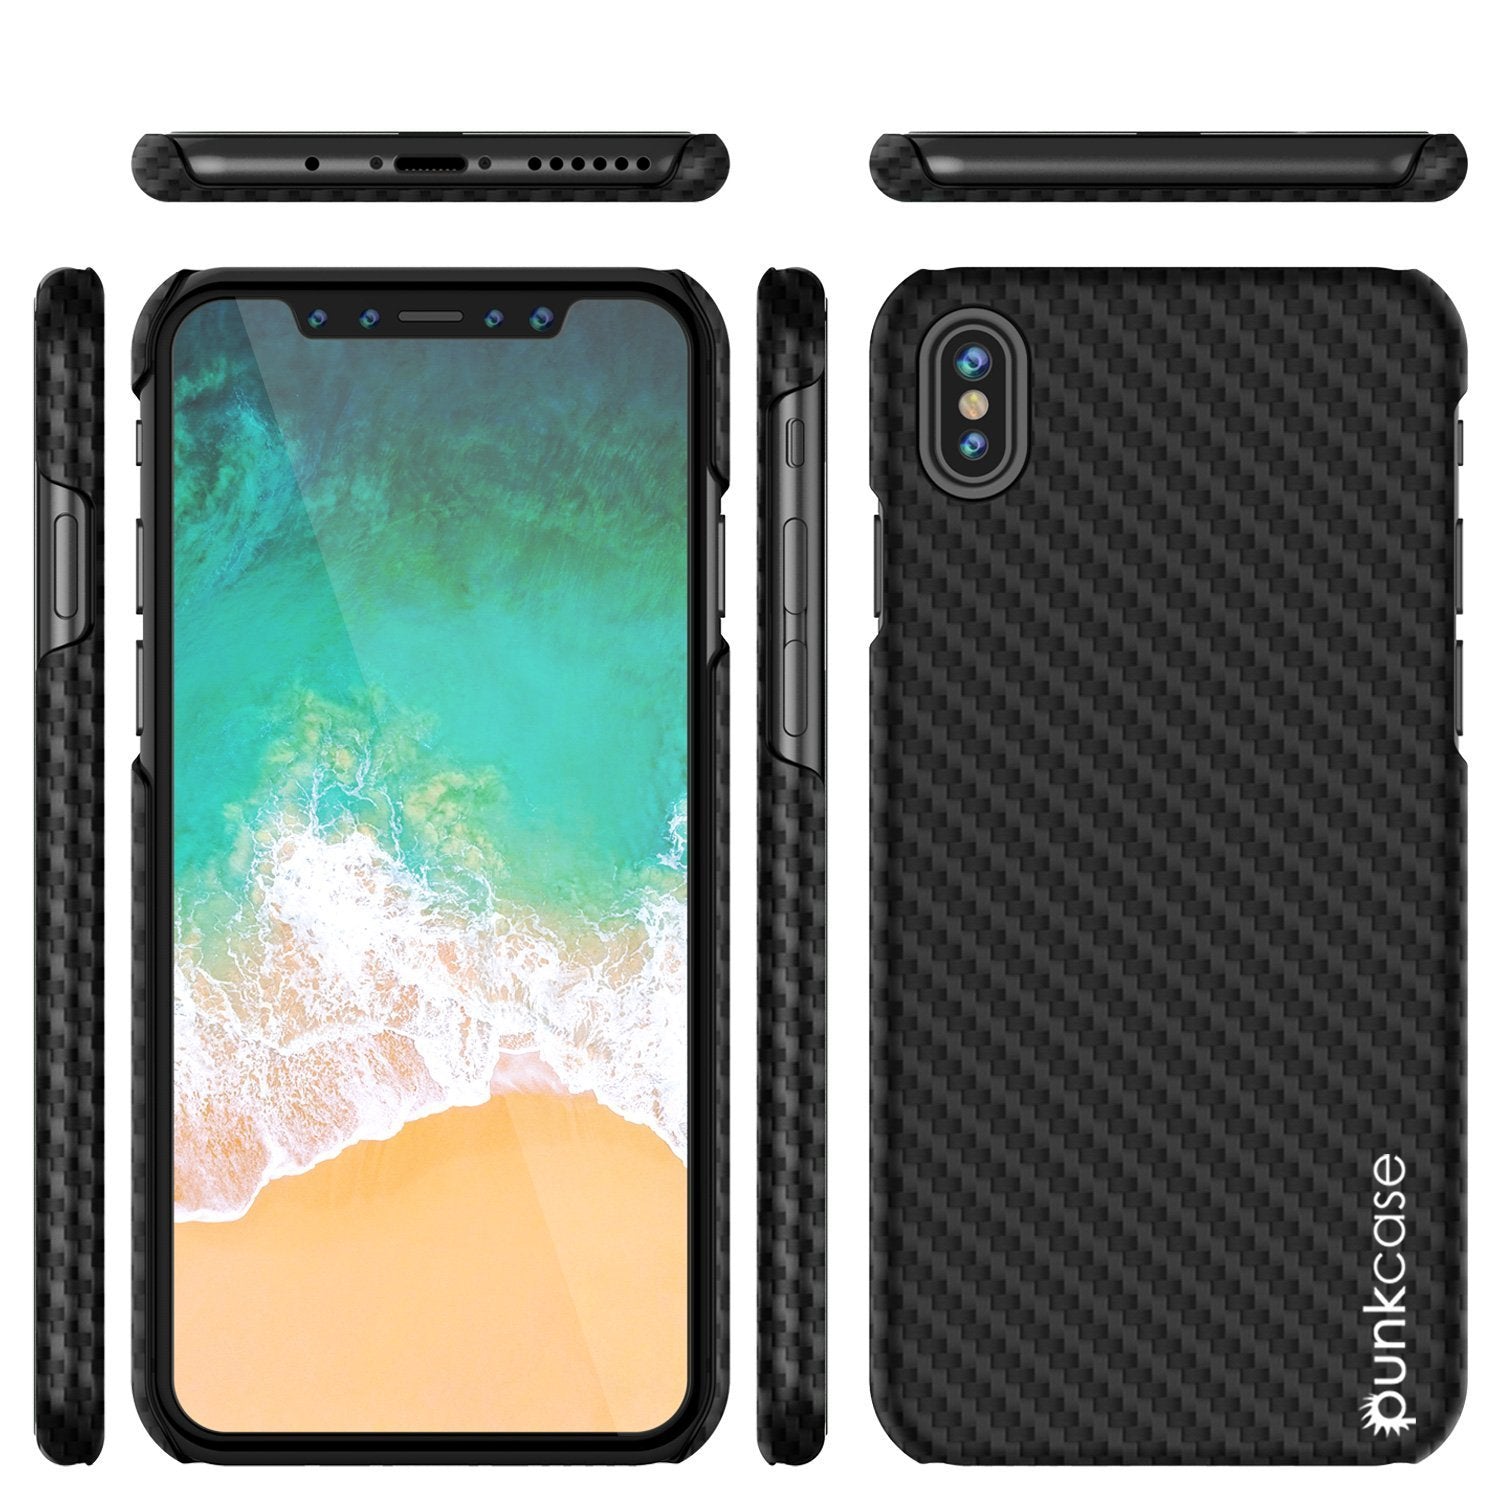 iPhone 8 Case, Punkcase CarbonShield, Heavy Duty & Ultra Thin 2 Piece Dual Layer PU Leather Cover with PUNKSHIELD Screen Protector [Black]